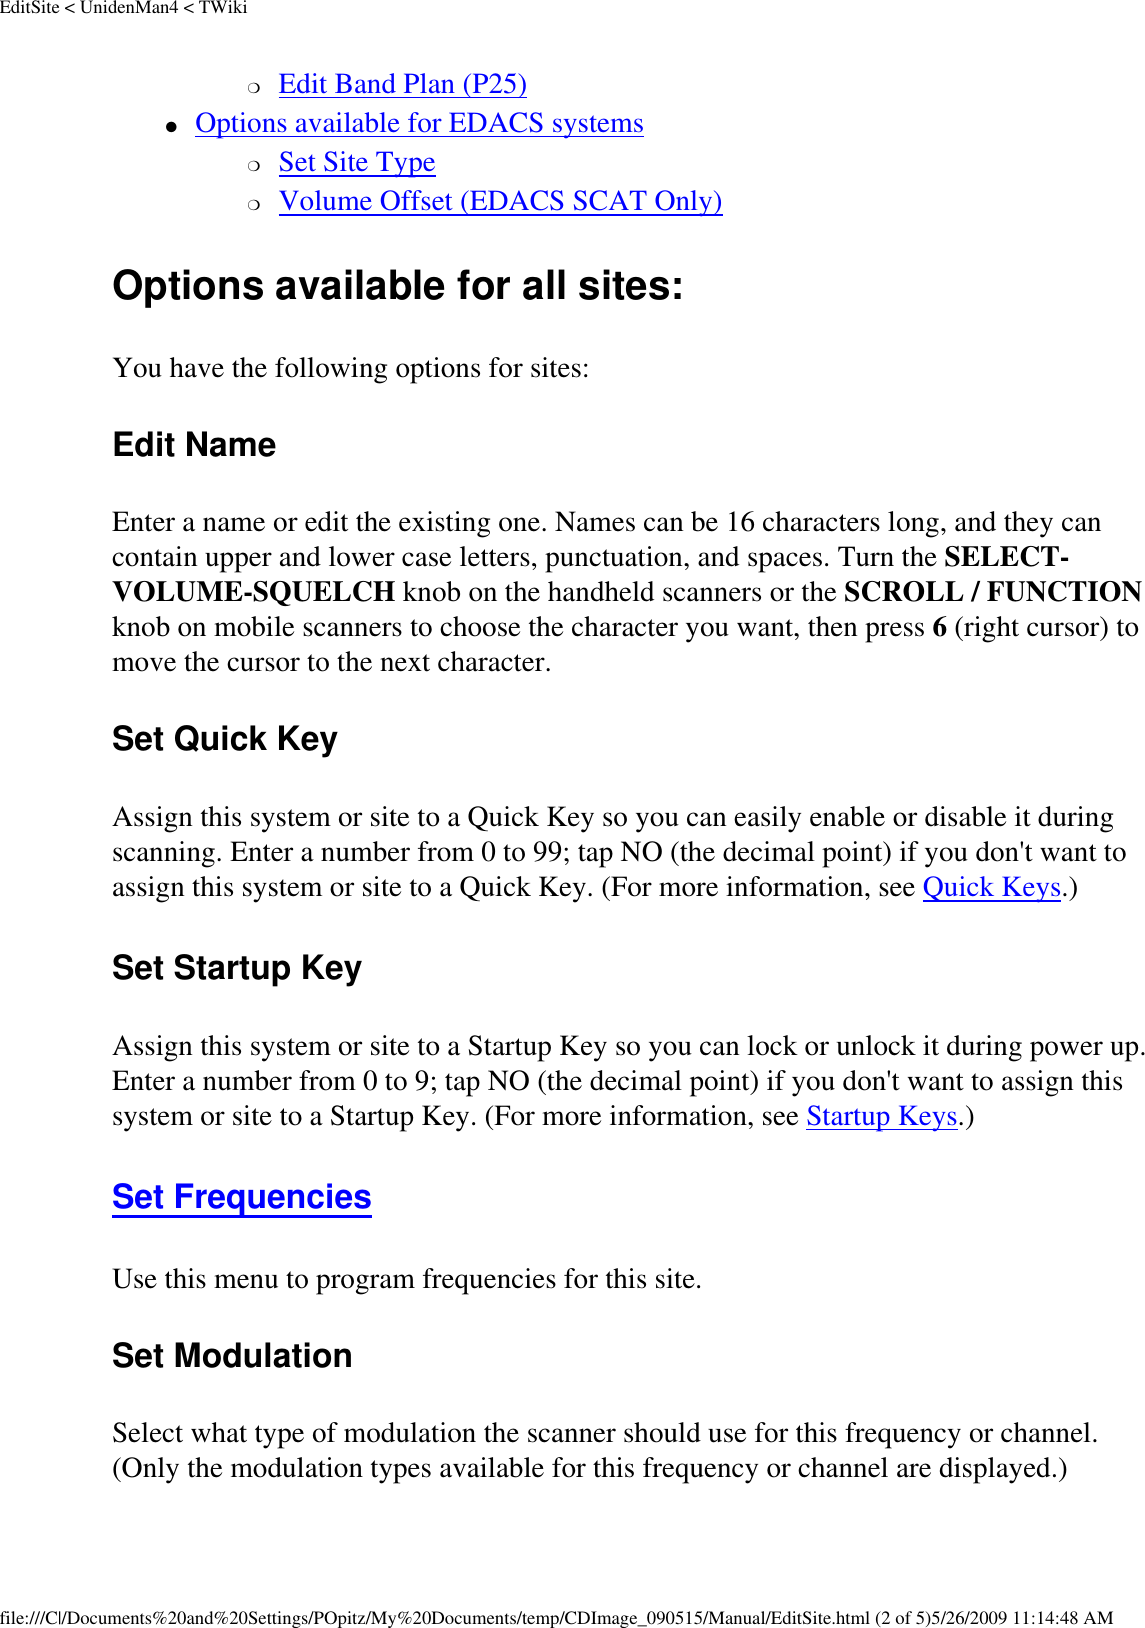 EditSite &lt; UnidenMan4 &lt; TWiki❍     Edit Band Plan (P25) ●     Options available for EDACS systems ❍     Set Site Type ❍     Volume Offset (EDACS SCAT Only) Options available for all sites: You have the following options for sites: Edit Name Enter a name or edit the existing one. Names can be 16 characters long, and they can contain upper and lower case letters, punctuation, and spaces. Turn the SELECT-VOLUME-SQUELCH knob on the handheld scanners or the SCROLL / FUNCTION knob on mobile scanners to choose the character you want, then press 6 (right cursor) to move the cursor to the next character. Set Quick Key Assign this system or site to a Quick Key so you can easily enable or disable it during scanning. Enter a number from 0 to 99; tap NO (the decimal point) if you don&apos;t want to assign this system or site to a Quick Key. (For more information, see Quick Keys.) Set Startup Key Assign this system or site to a Startup Key so you can lock or unlock it during power up. Enter a number from 0 to 9; tap NO (the decimal point) if you don&apos;t want to assign this system or site to a Startup Key. (For more information, see Startup Keys.) Set Frequencies Use this menu to program frequencies for this site. Set Modulation Select what type of modulation the scanner should use for this frequency or channel. (Only the modulation types available for this frequency or channel are displayed.) file:///C|/Documents%20and%20Settings/POpitz/My%20Documents/temp/CDImage_090515/Manual/EditSite.html (2 of 5)5/26/2009 11:14:48 AM